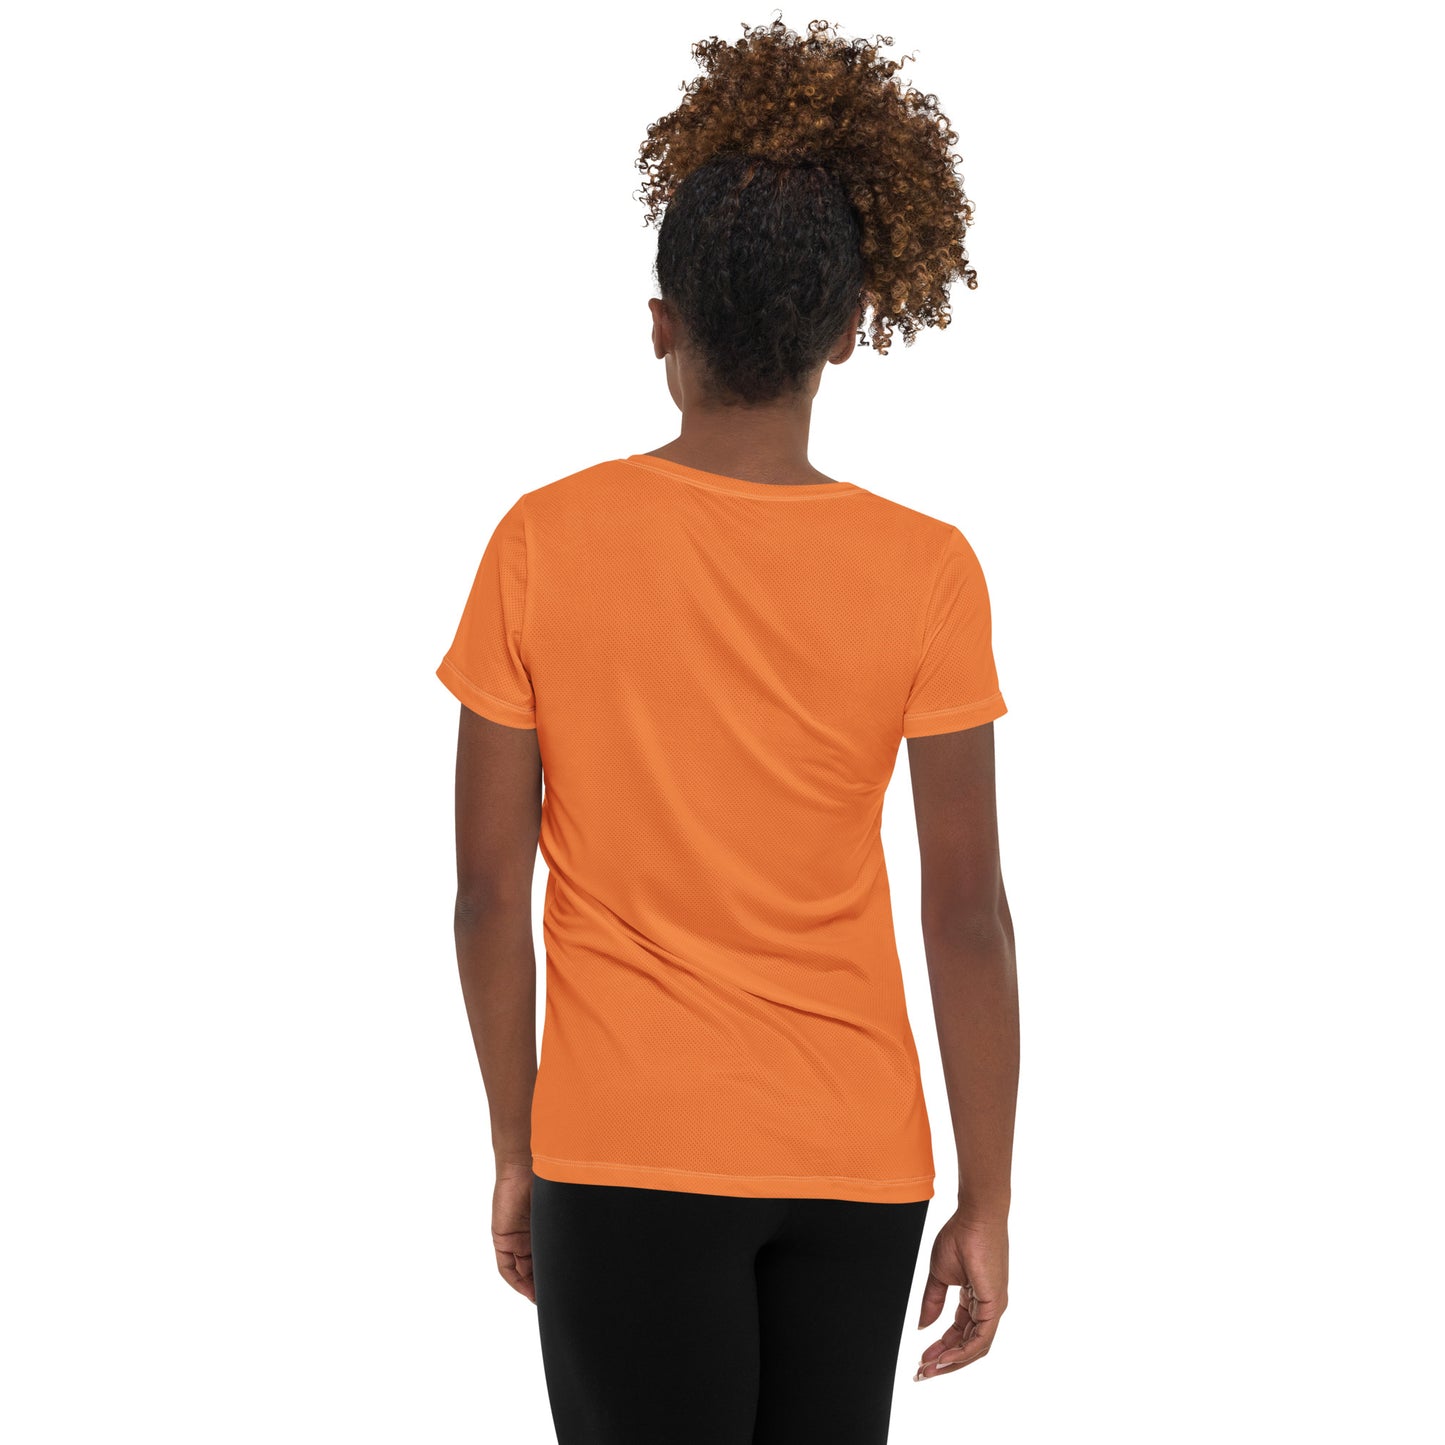 TIME OF VIBES - Women's Athletic T-shirt VIBES (Orange) - €45.00